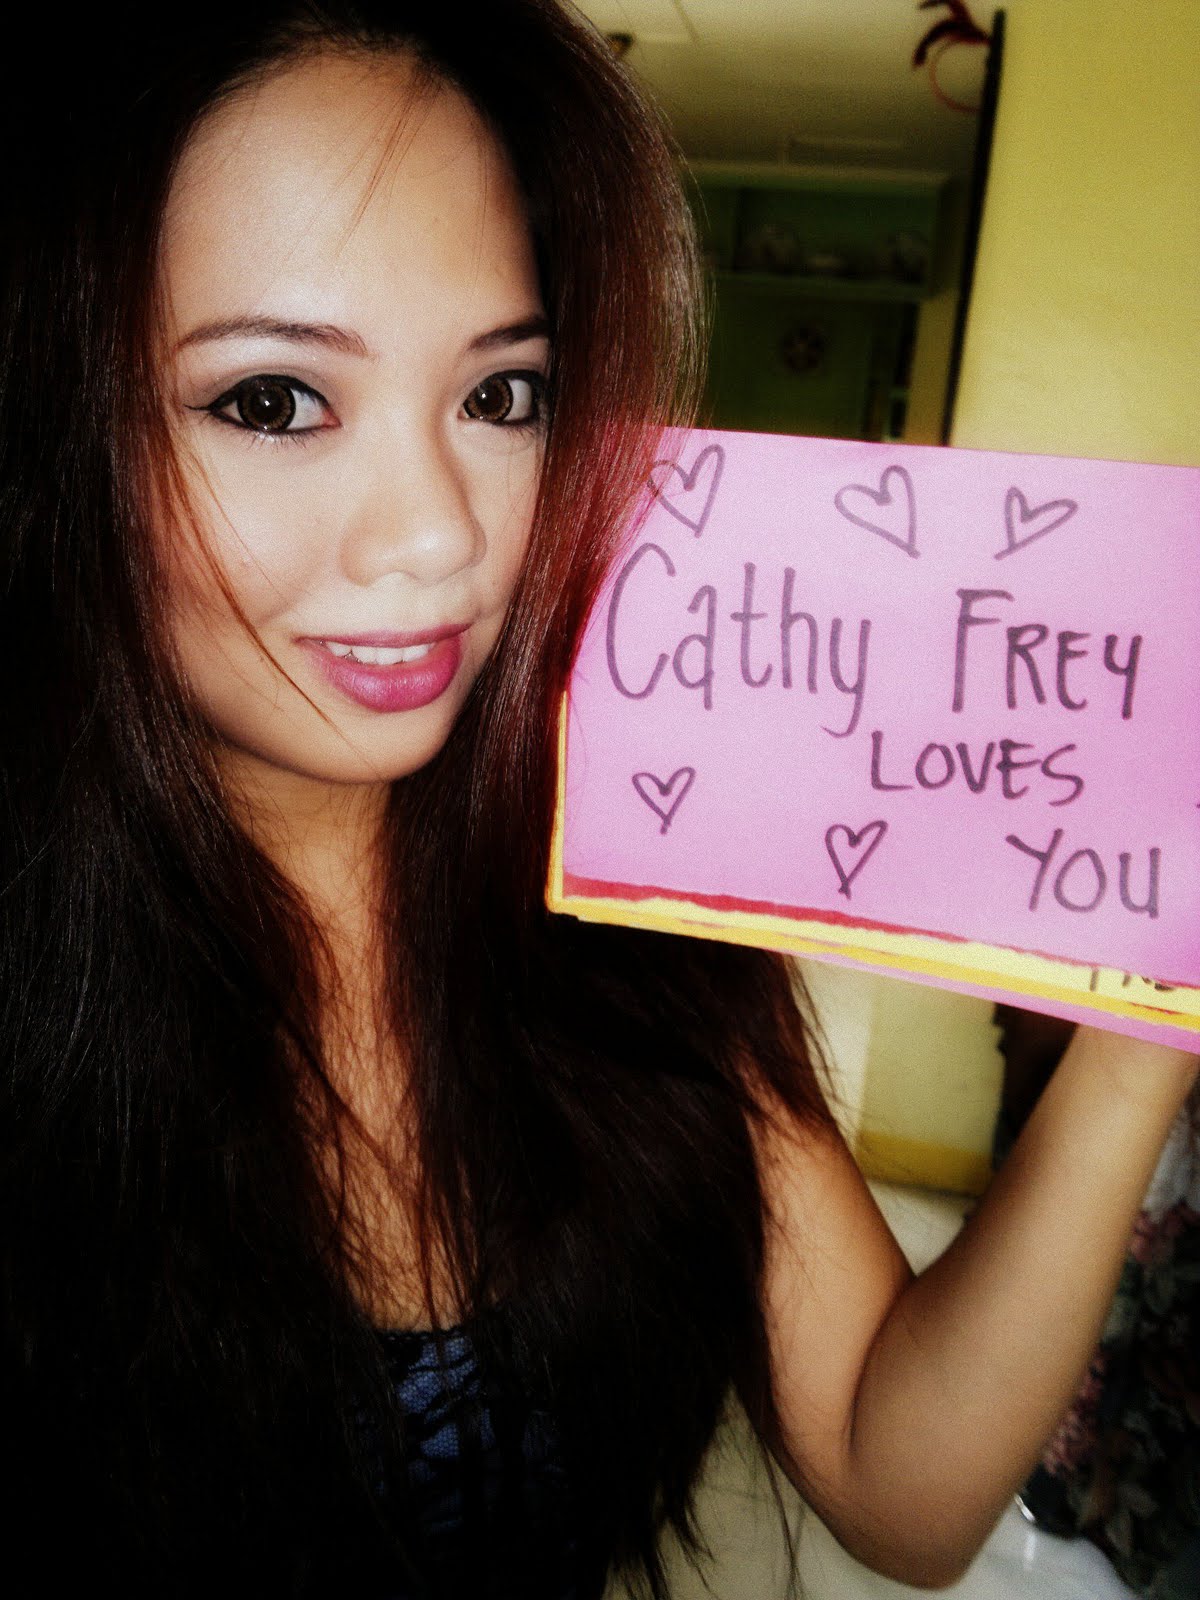 Cathy Frey Loves You Hot Pinay